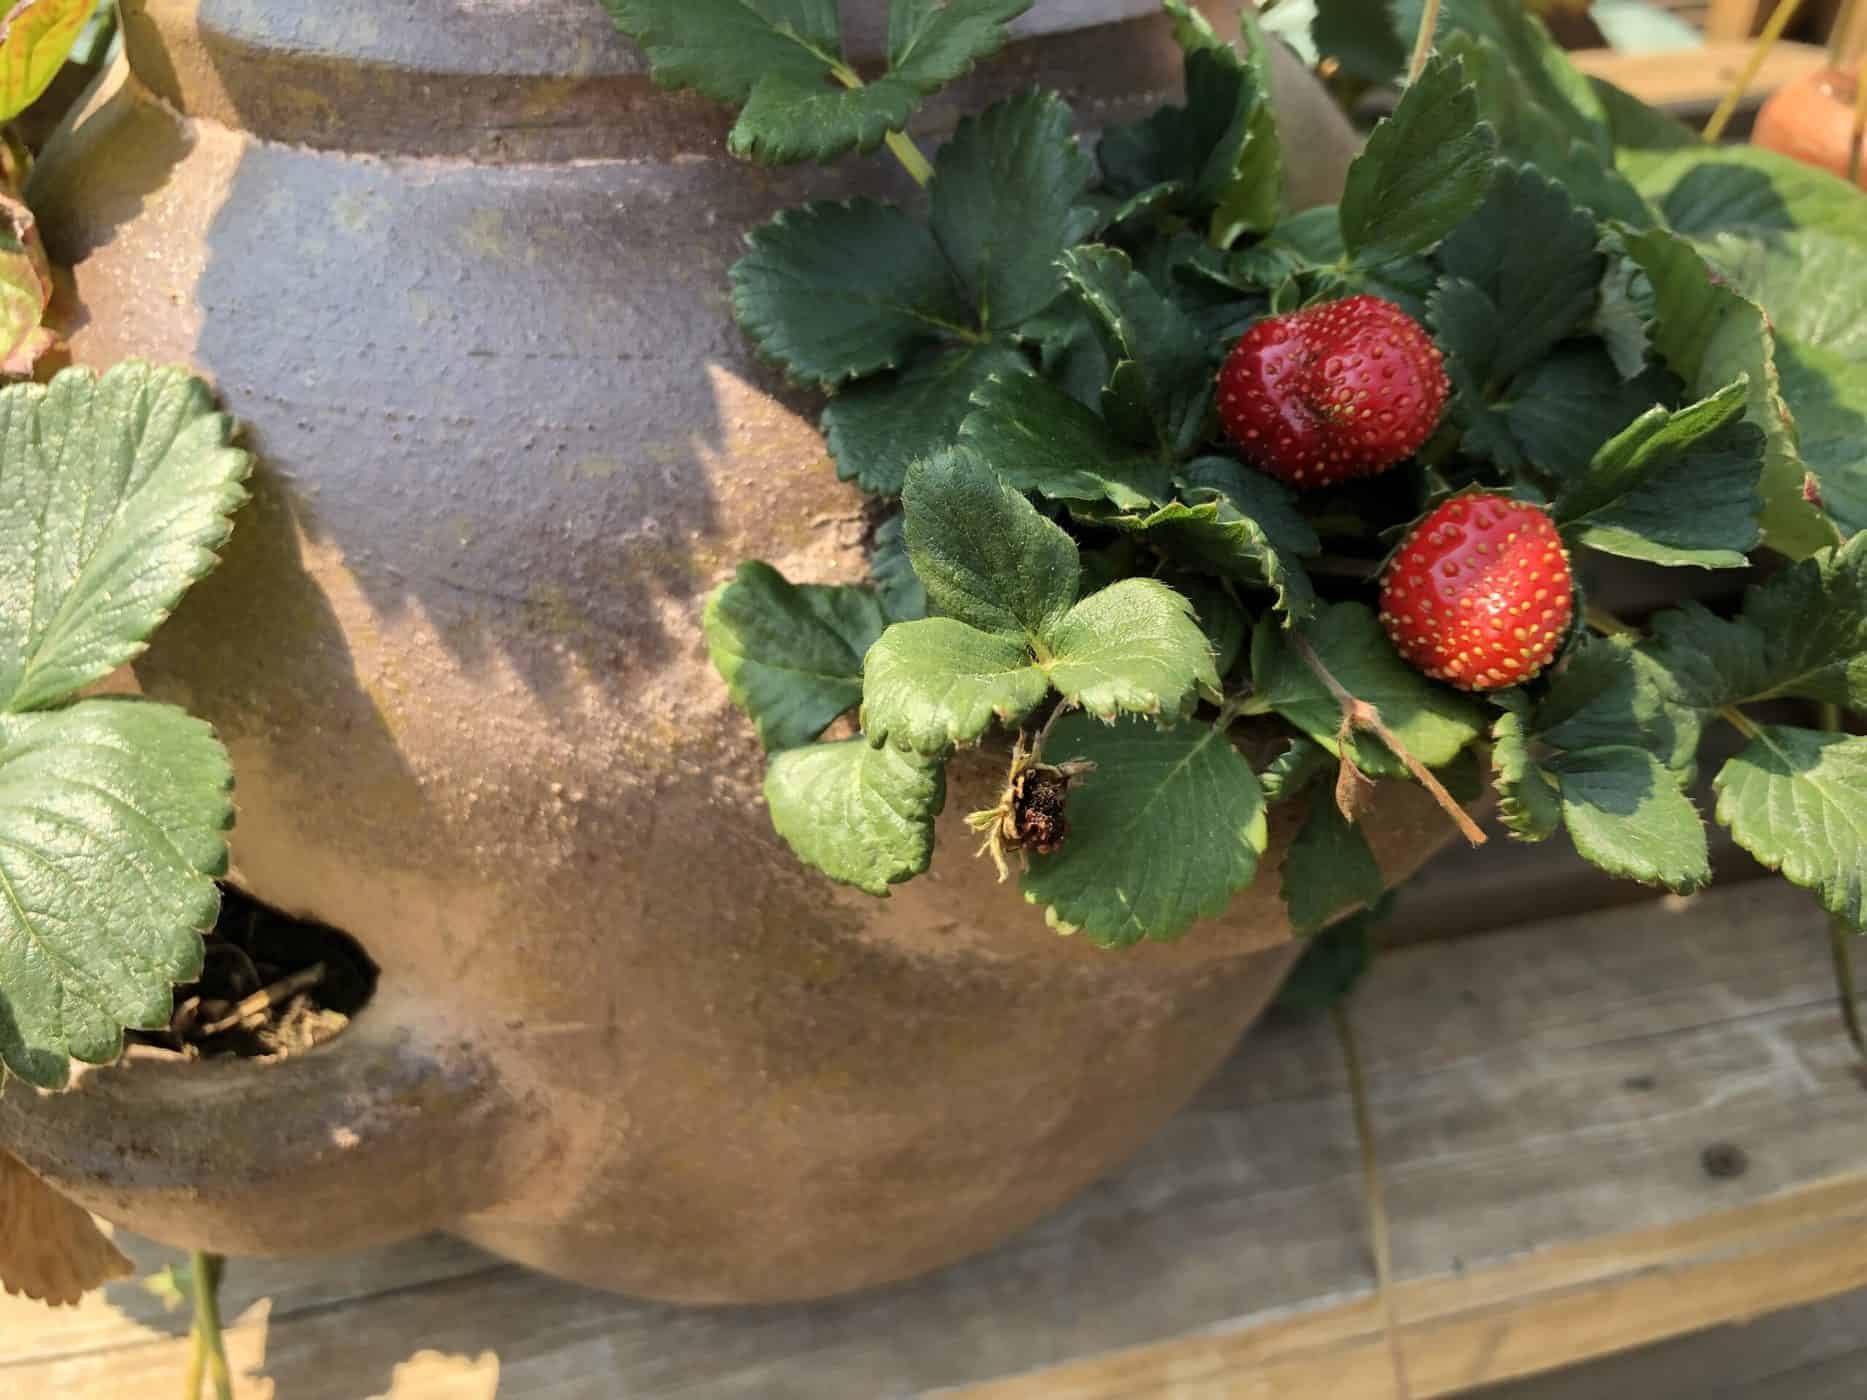 Strawberries growing in strawberry pot planter